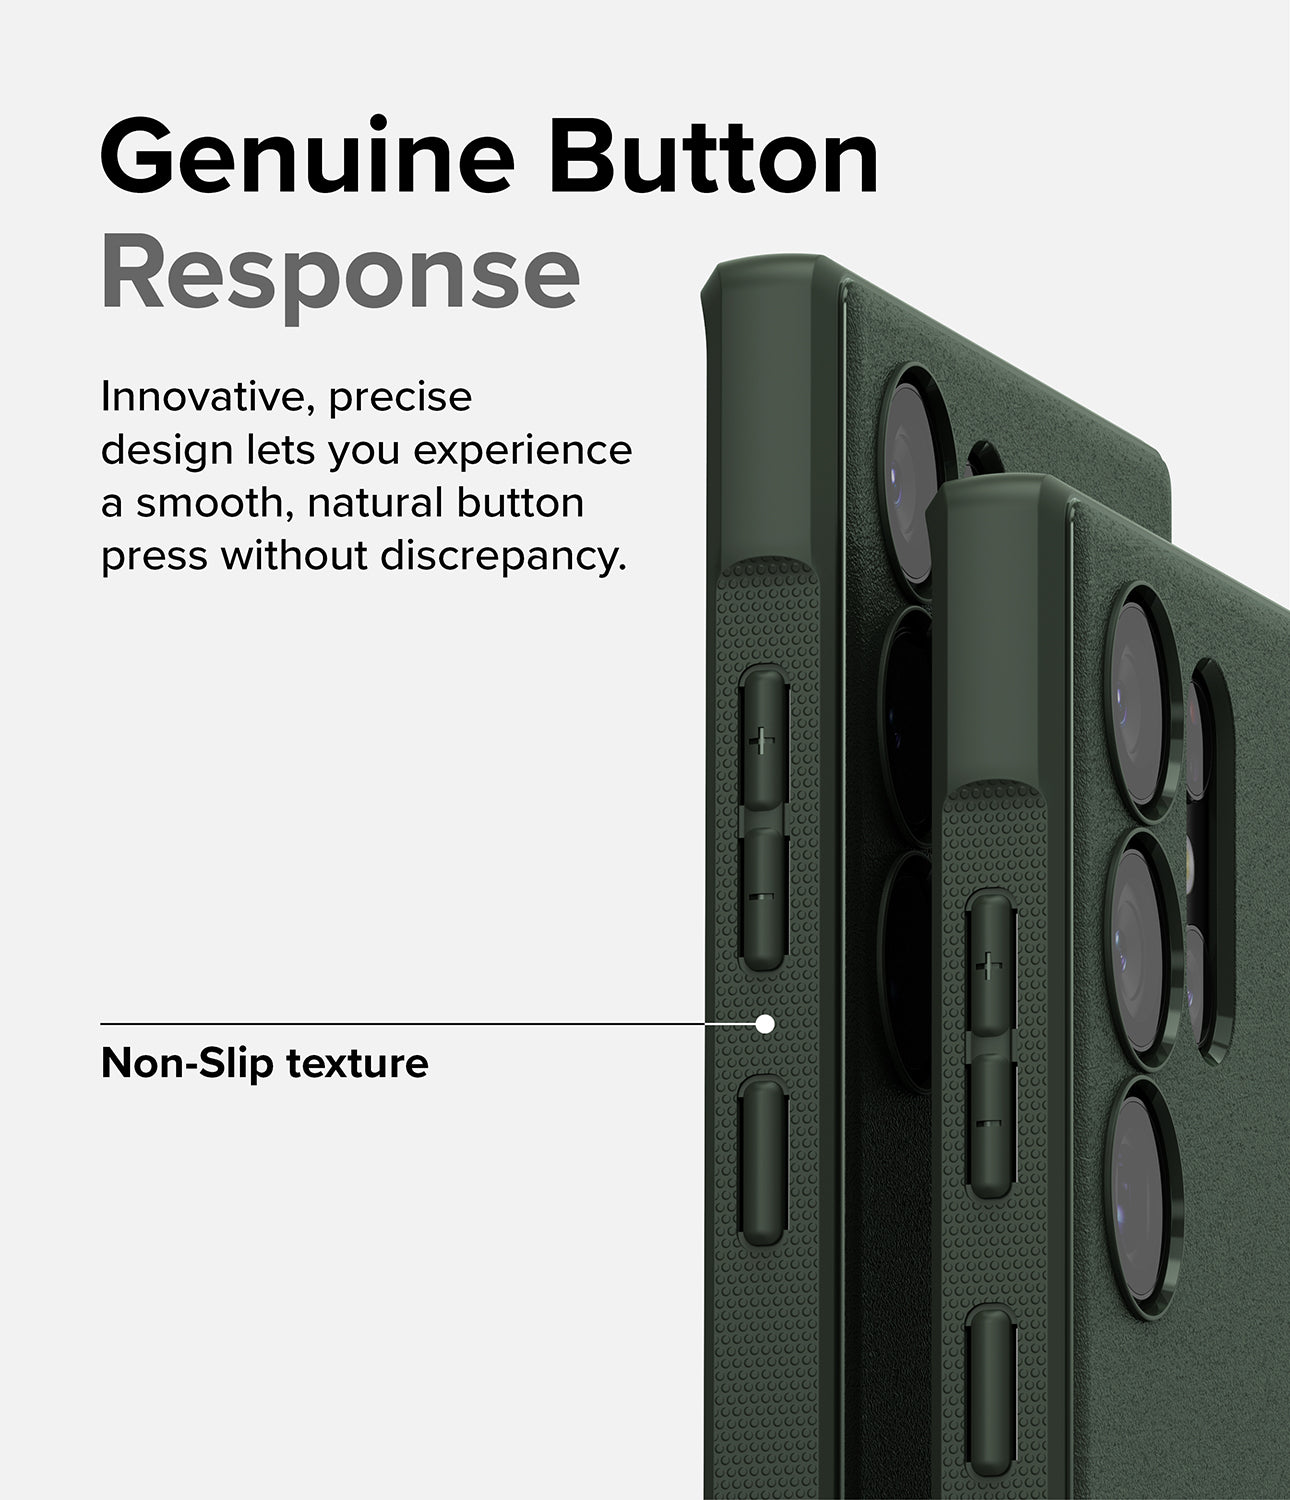 Galaxy S23 Ultra Case | Onyx - Dark Green - Genuine Button Response. Innovative, precise design lets you experience a smooth, natural button press without discrepancy. Non-Slip texture.